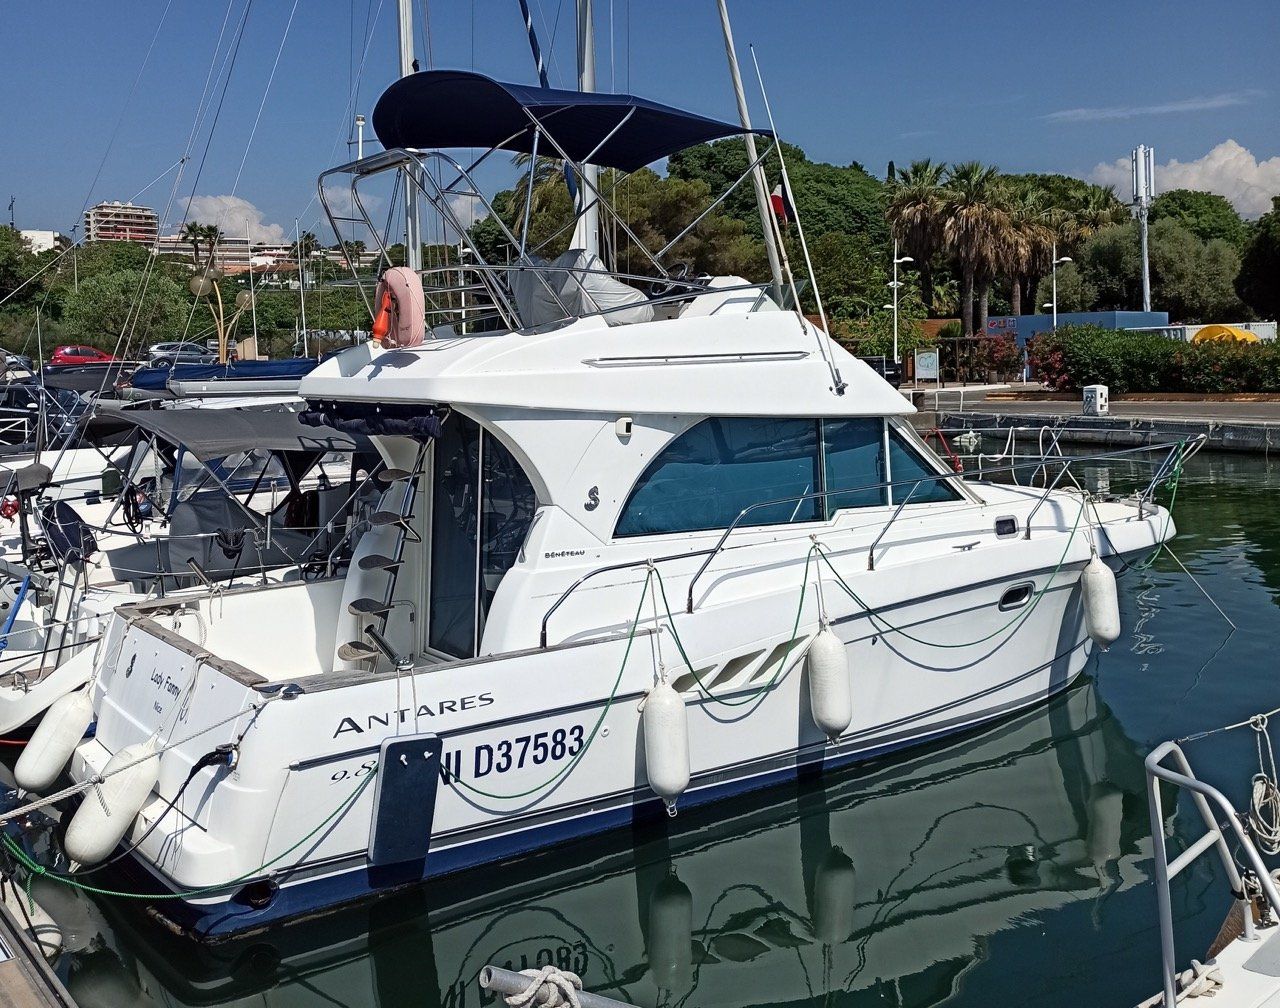 BENETEAU ANTARES 980 FLY OCCASION